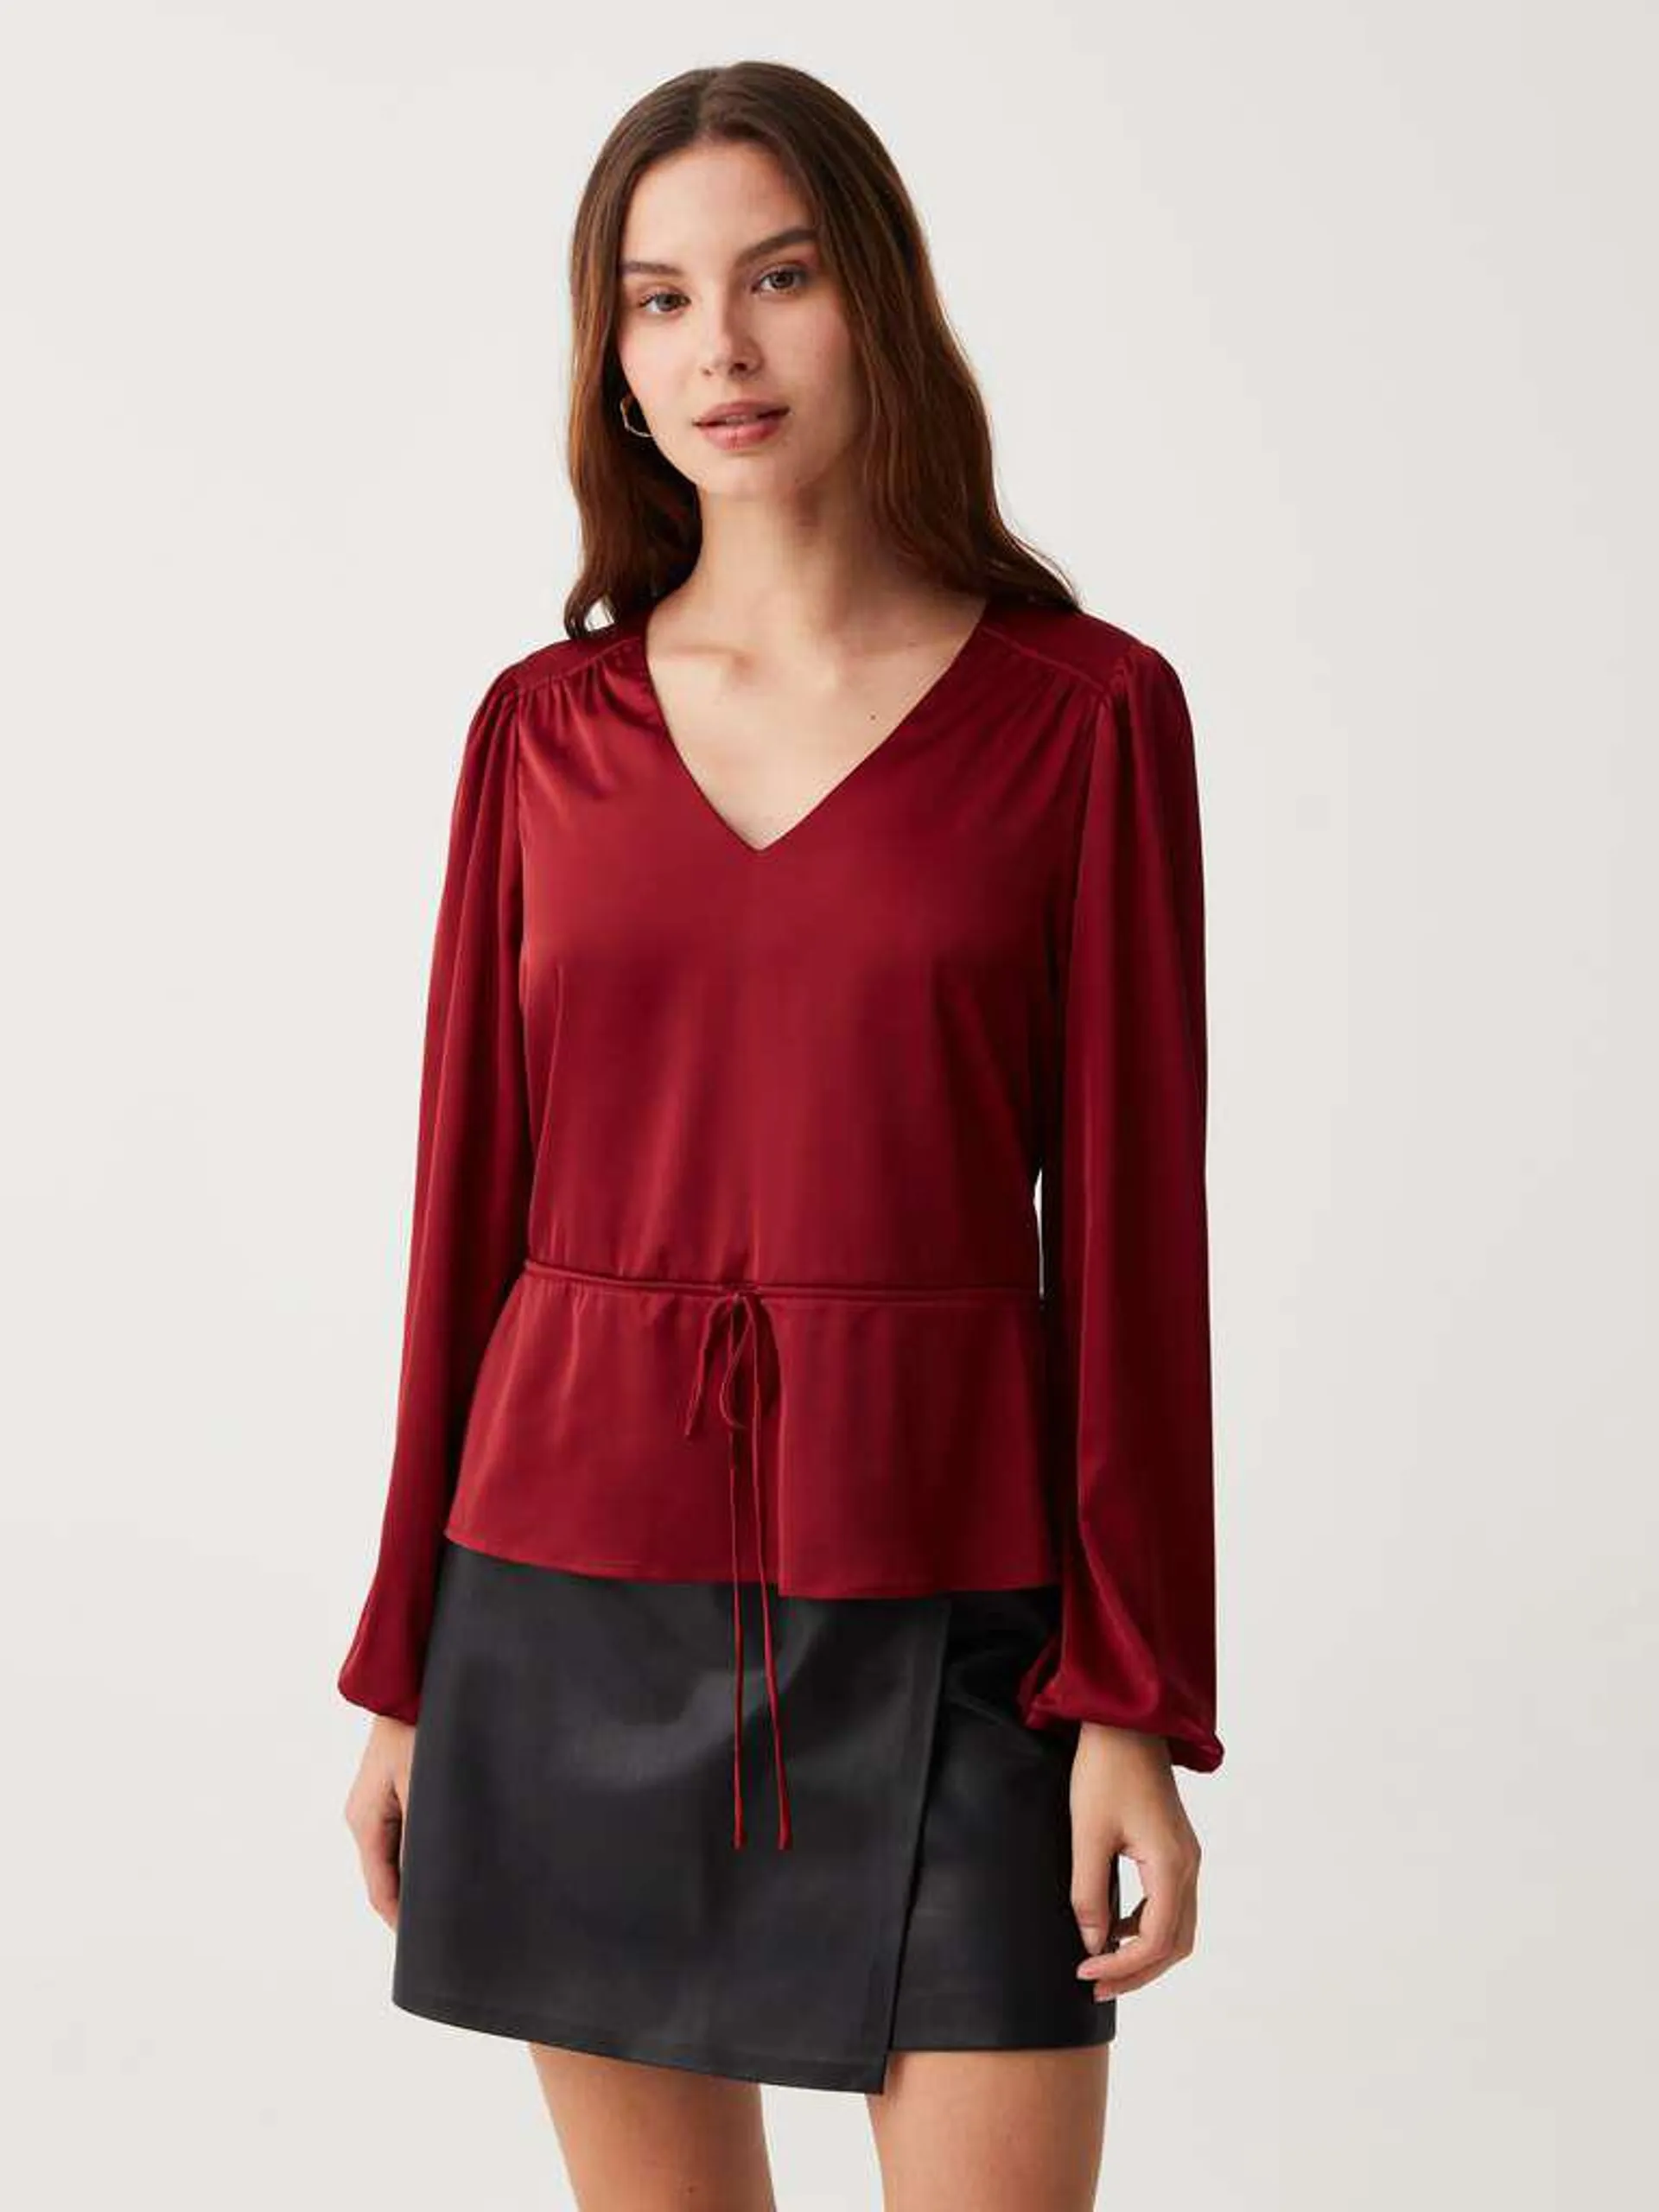 Cherry Red Satin blouse with drawstring